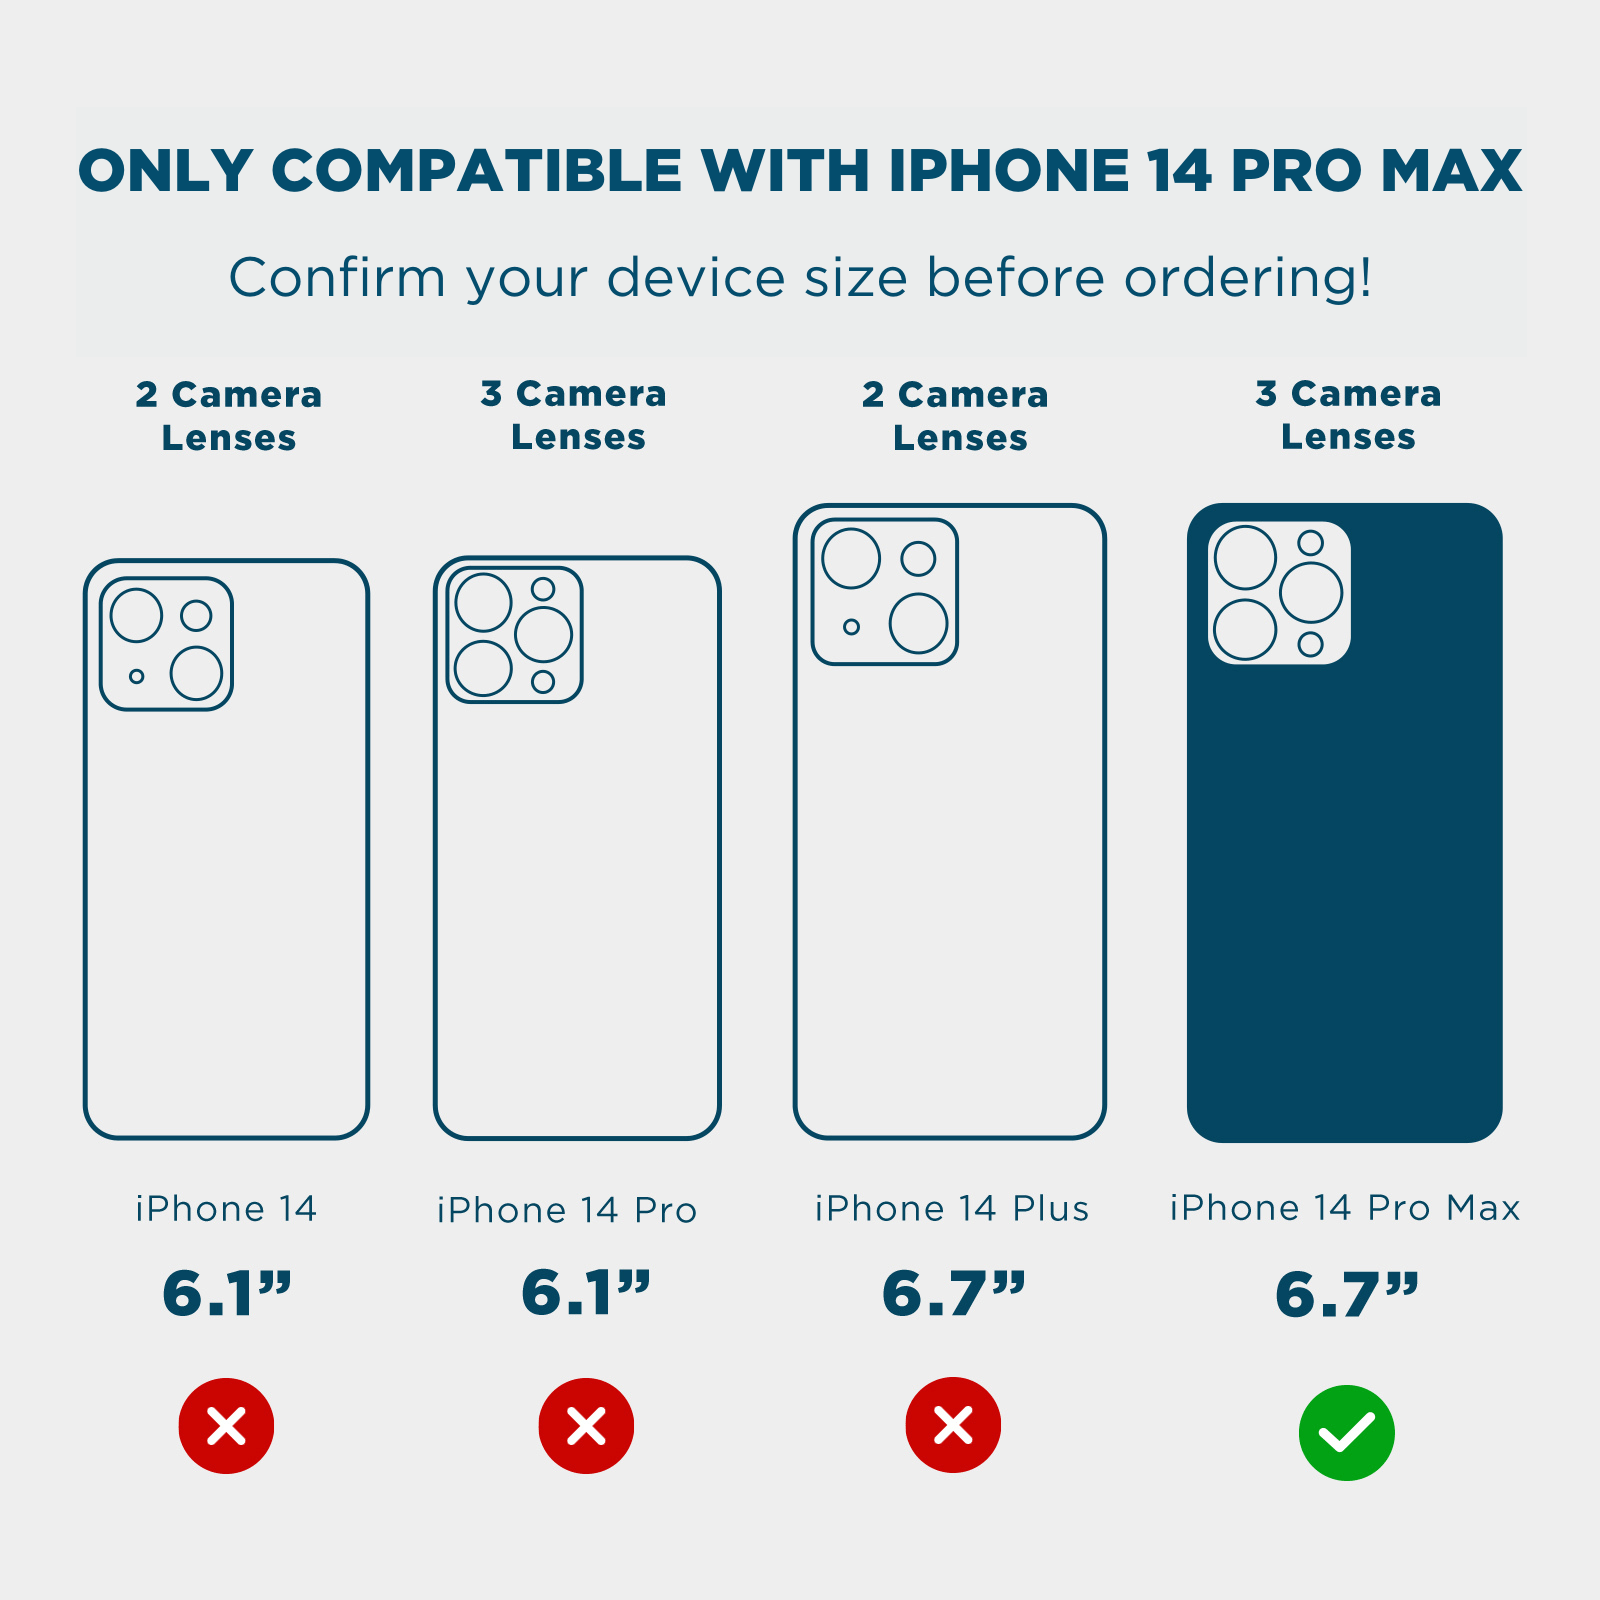 ONLY COMPATIBLE WITH IPHONE 14 PRO MAX. CONFIRM YOUR DEVICE SIZE BEFORE ORDERING. 2 CAMERA LENSES, 3 CAMERA LENSES, 2 CAMERA LENSES, 3 CAMERA LENSES, 6.1, 6.1, 6.7, 6.7. COLOR::FLORAL GEMS